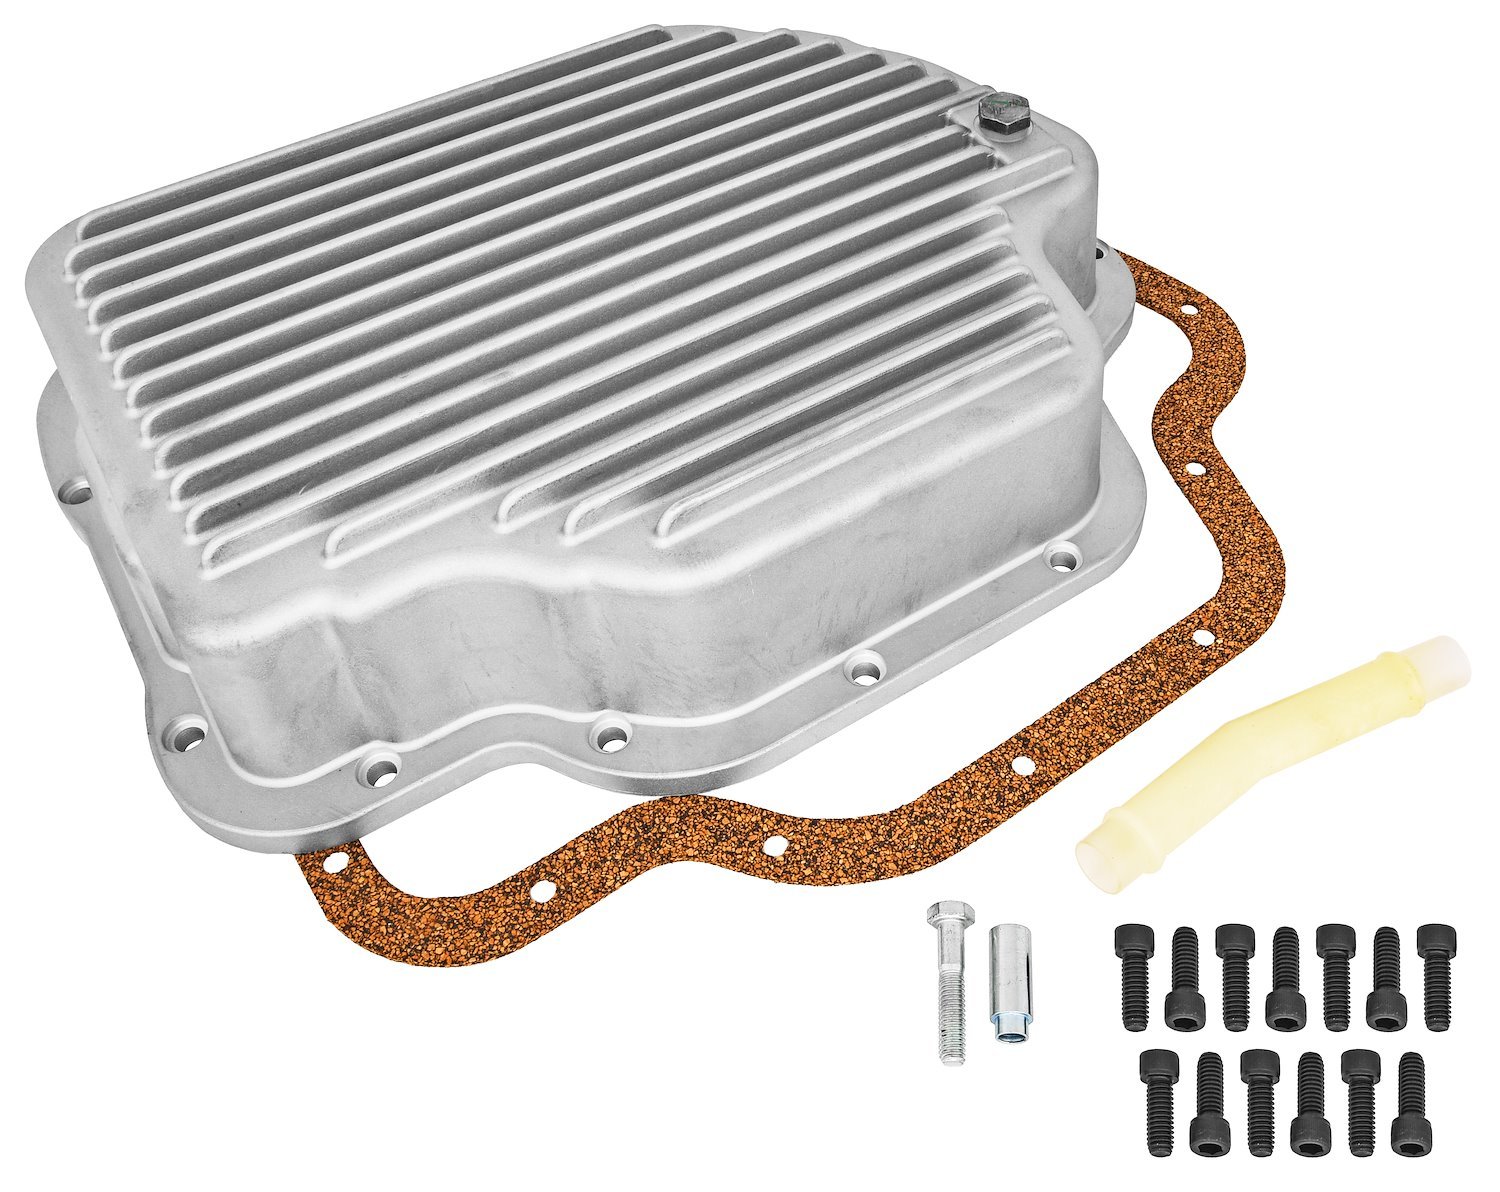 Cast Aluminum Transmission Pan for TH400 Automatic Transmission [3 1/2 in. Deep]